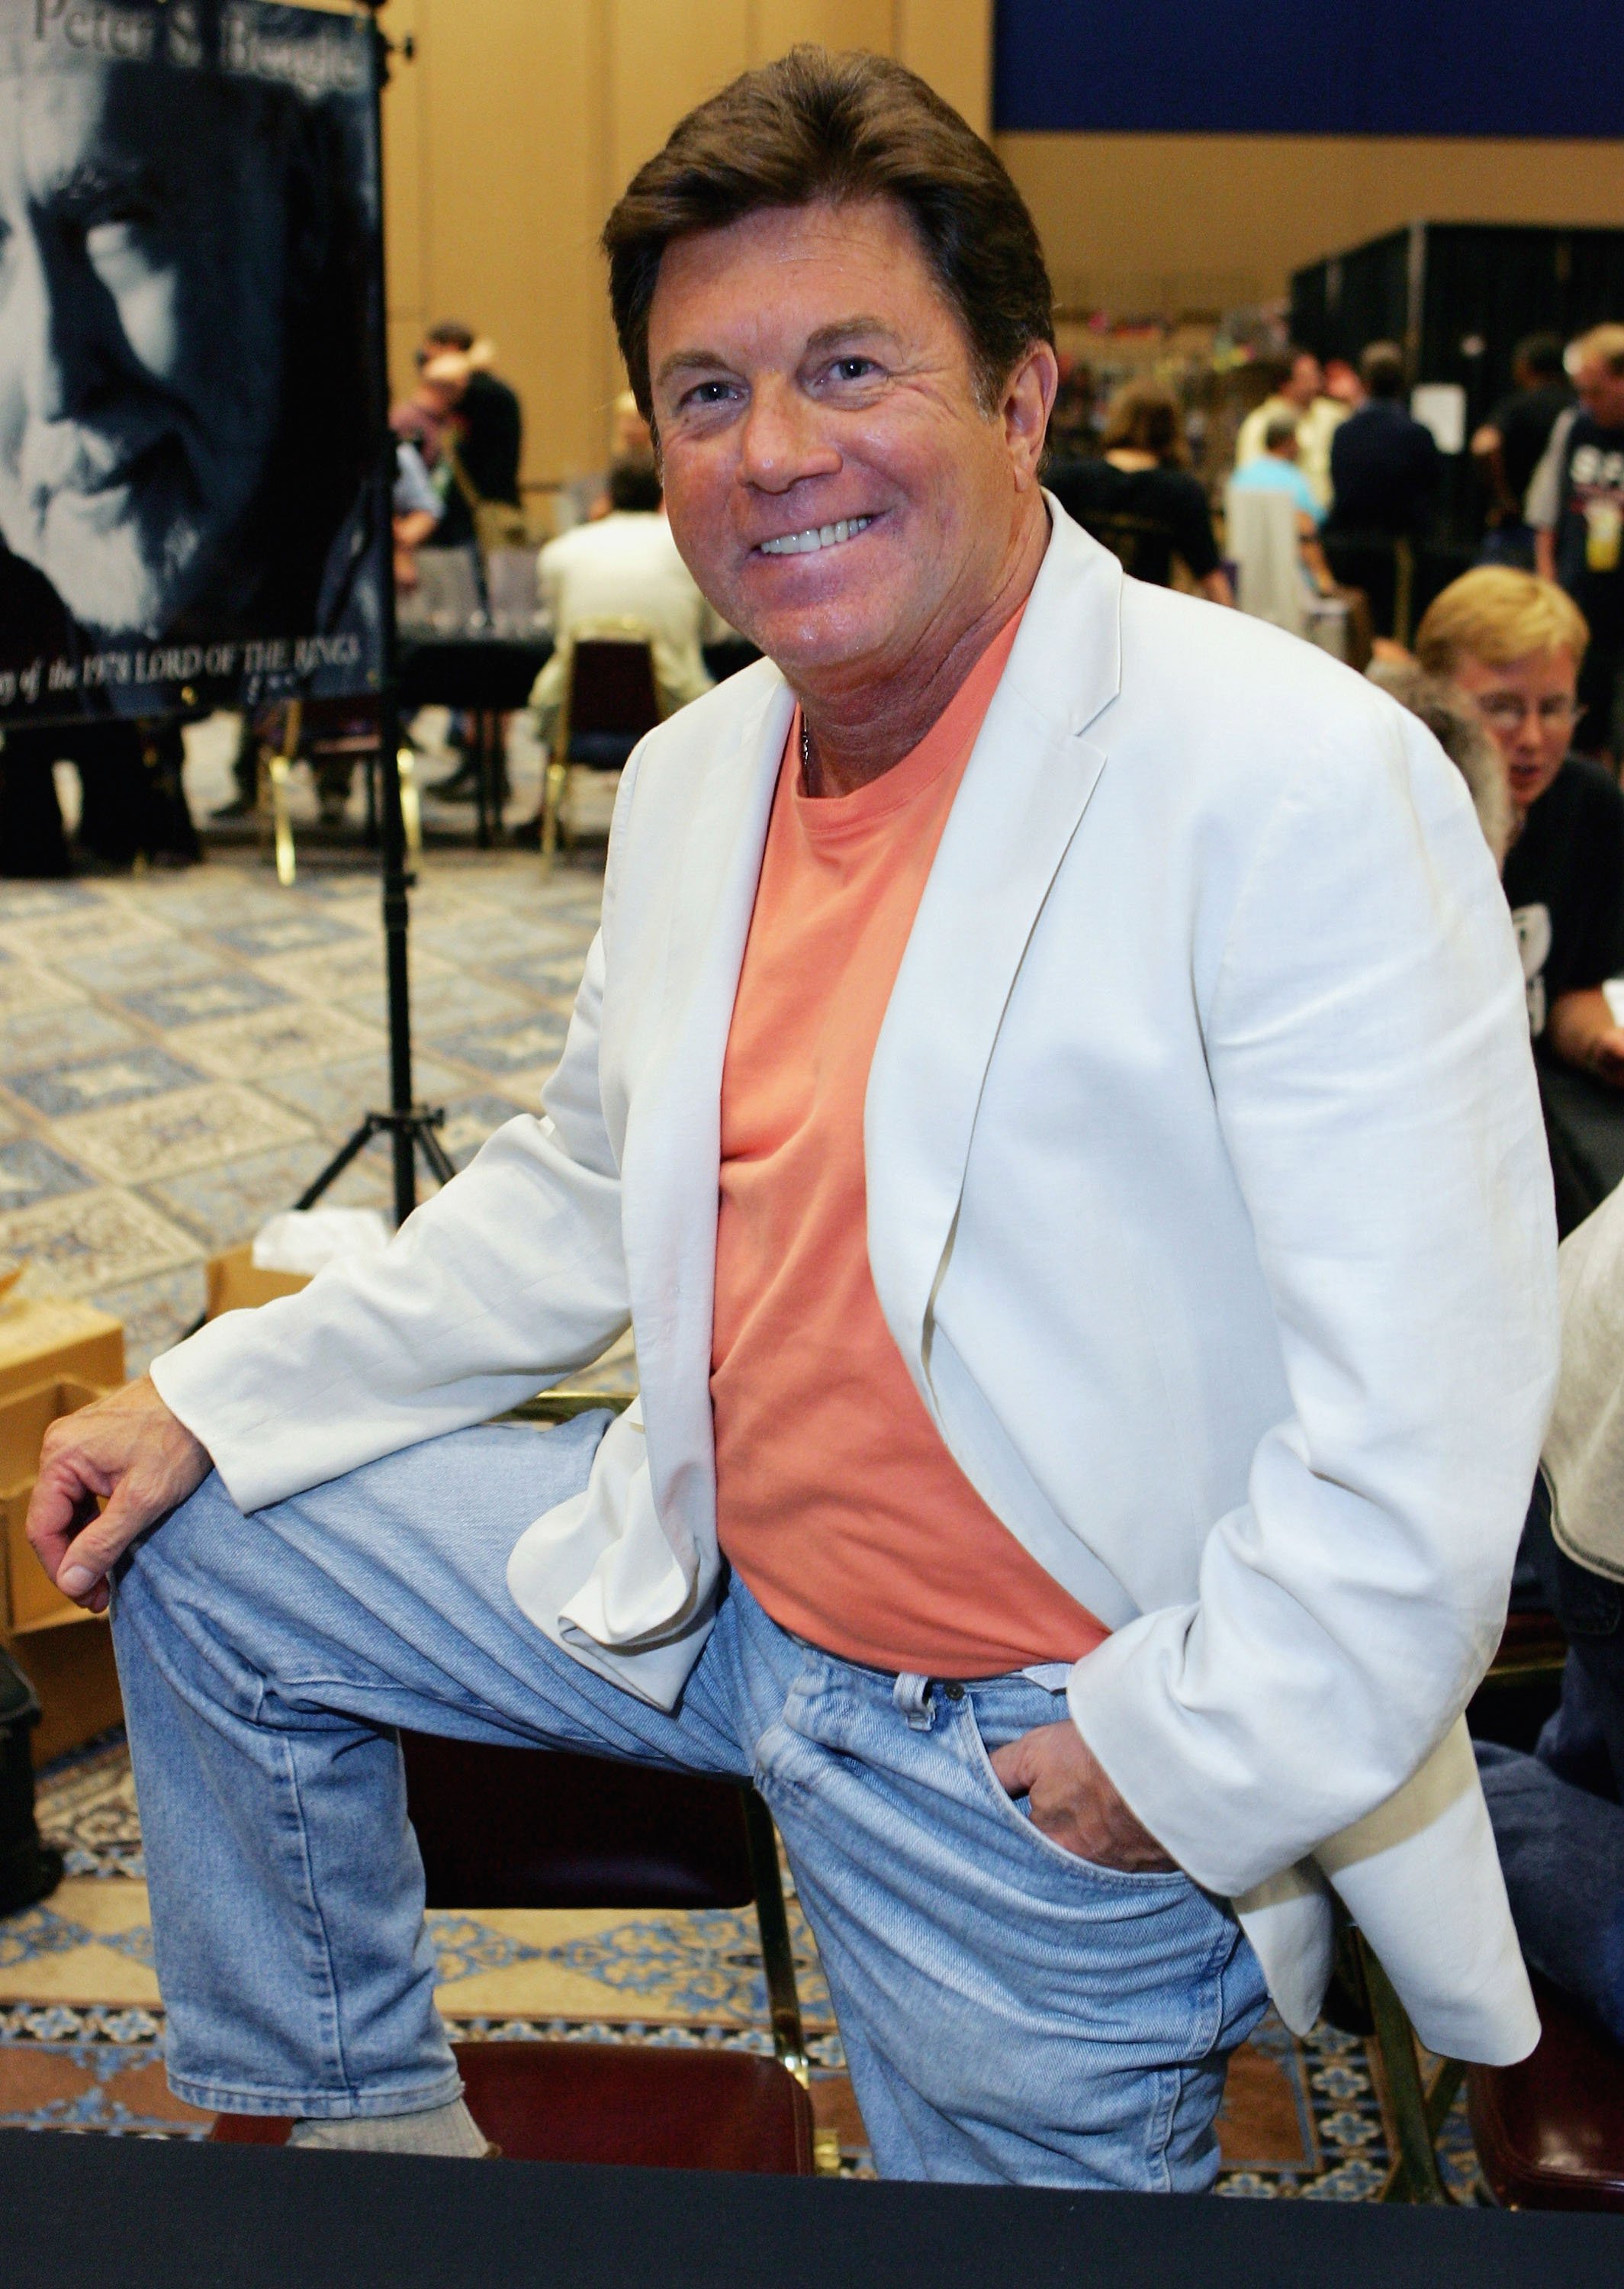  Larry Manetti poses at the Star Trek convention at the Las Vegas Hilton August 11, 2005 | Photo: GettyImages